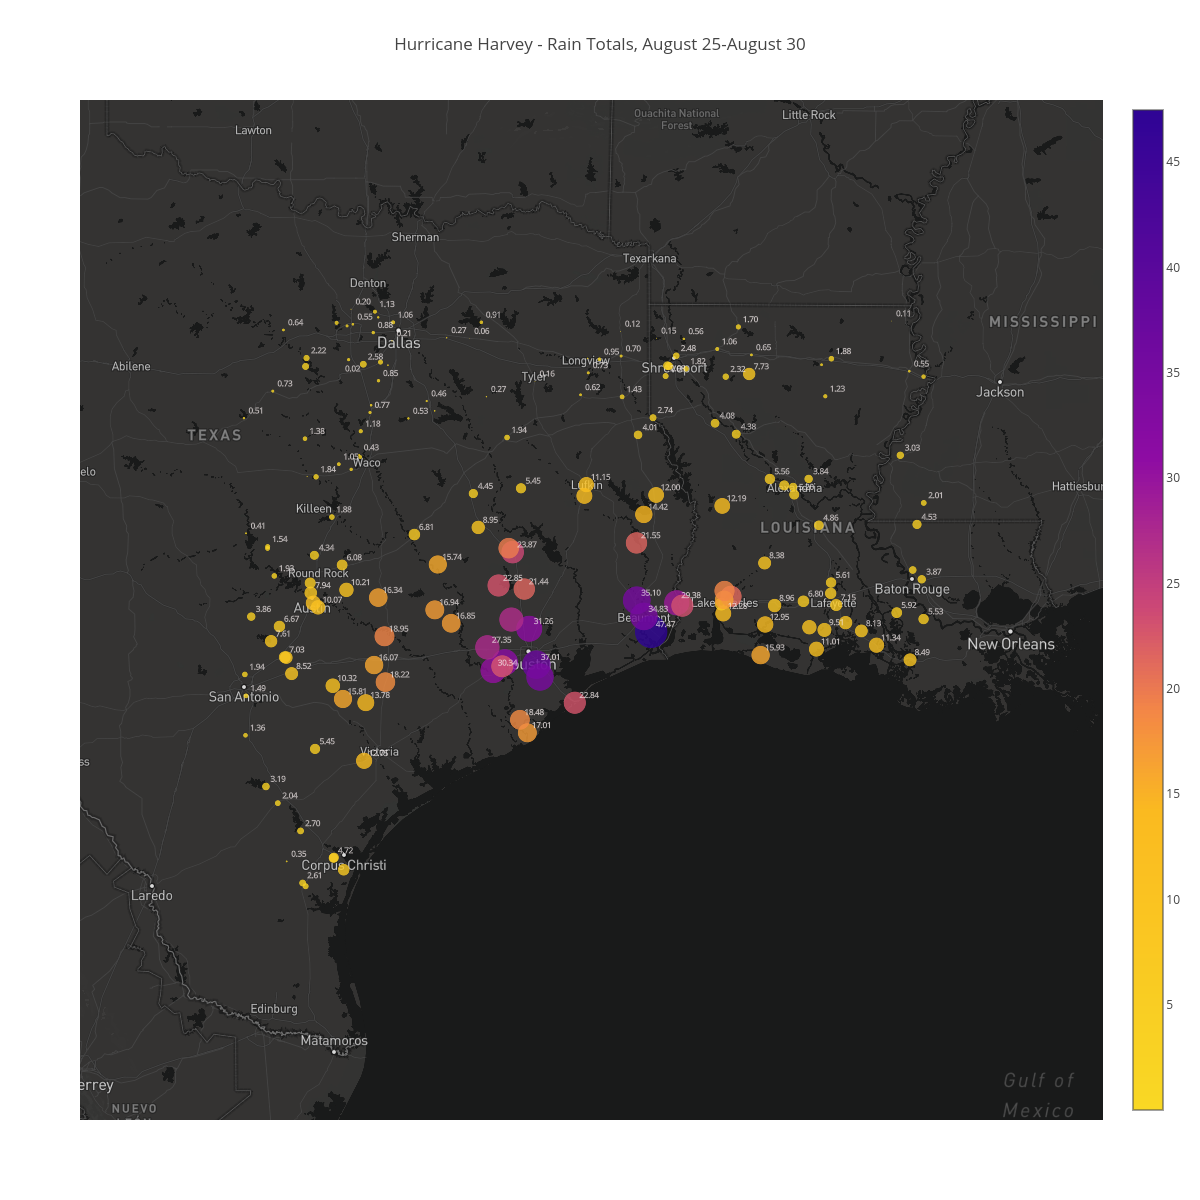 Hurricane Harvey - Rain Totals, August 25-August 30 | scattermapbox made by Bigdata153 | plotly